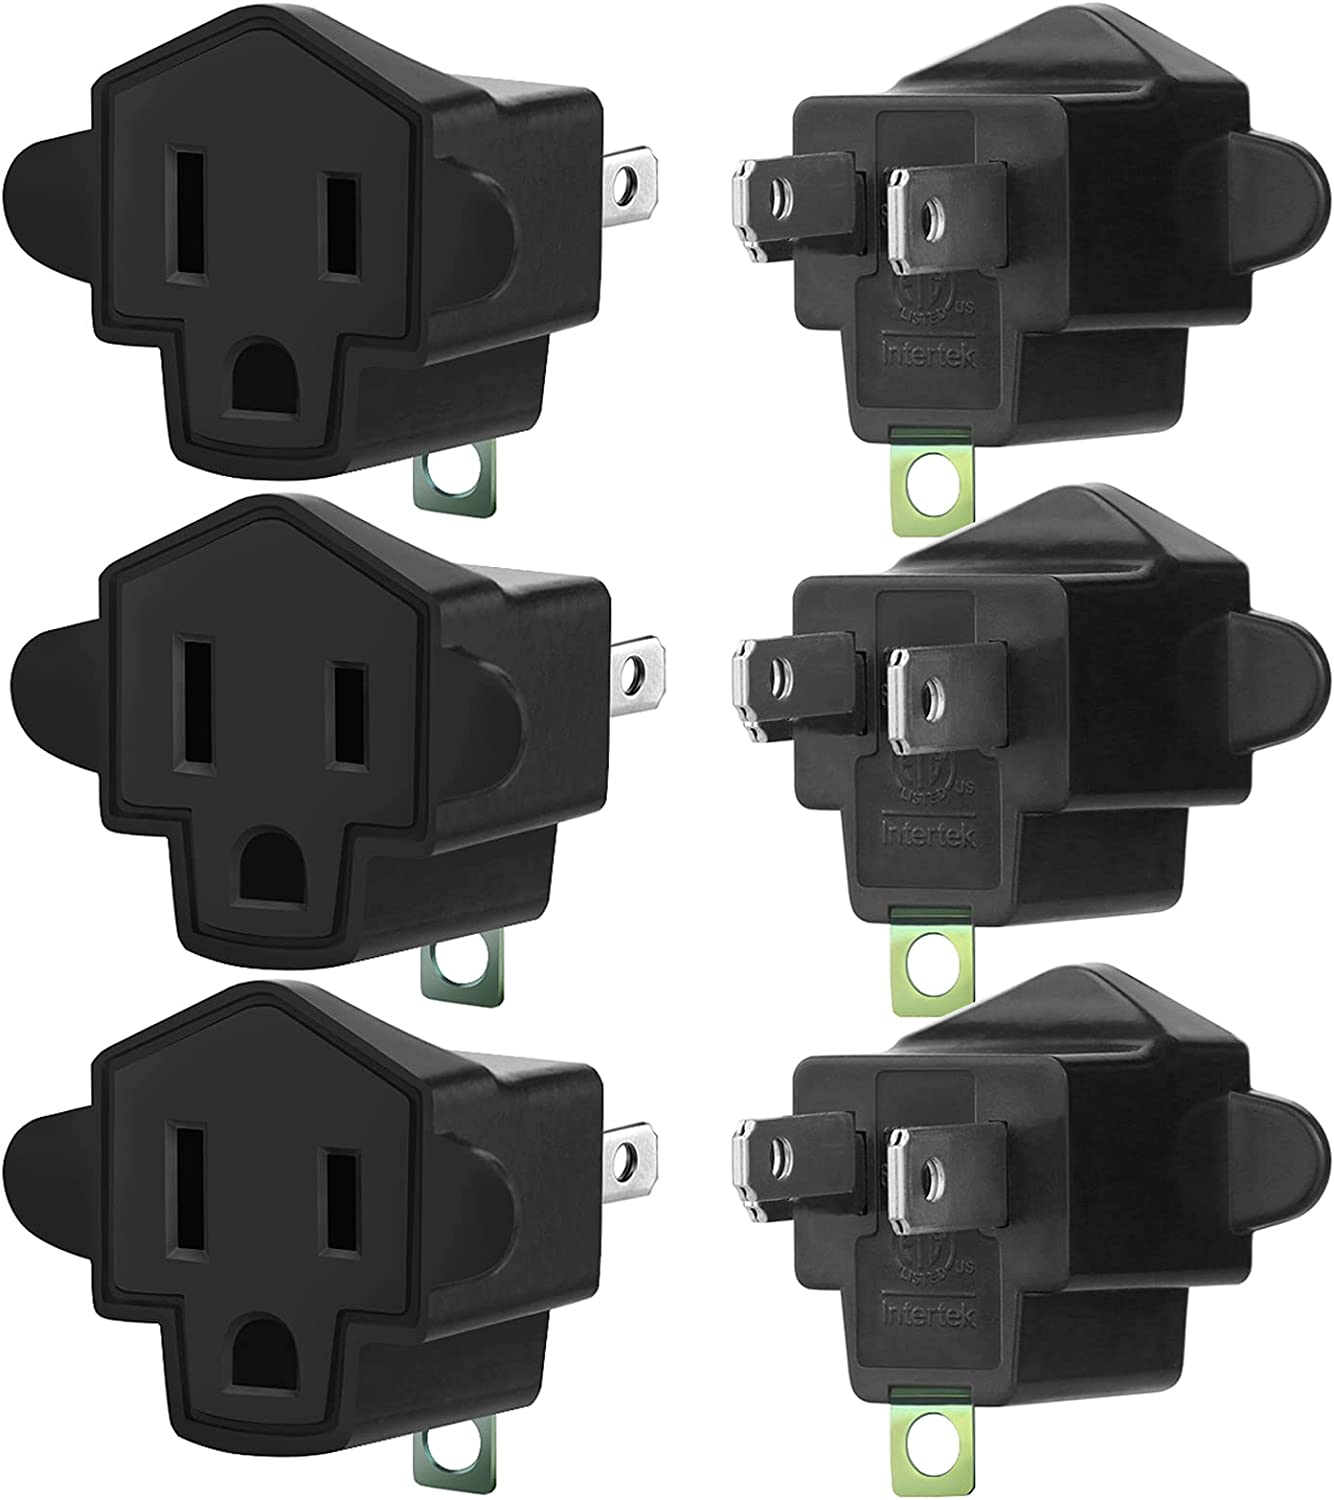 WuliFun Fireproof Casing 3-To-2 Prong Plug Adapters, 6-Count